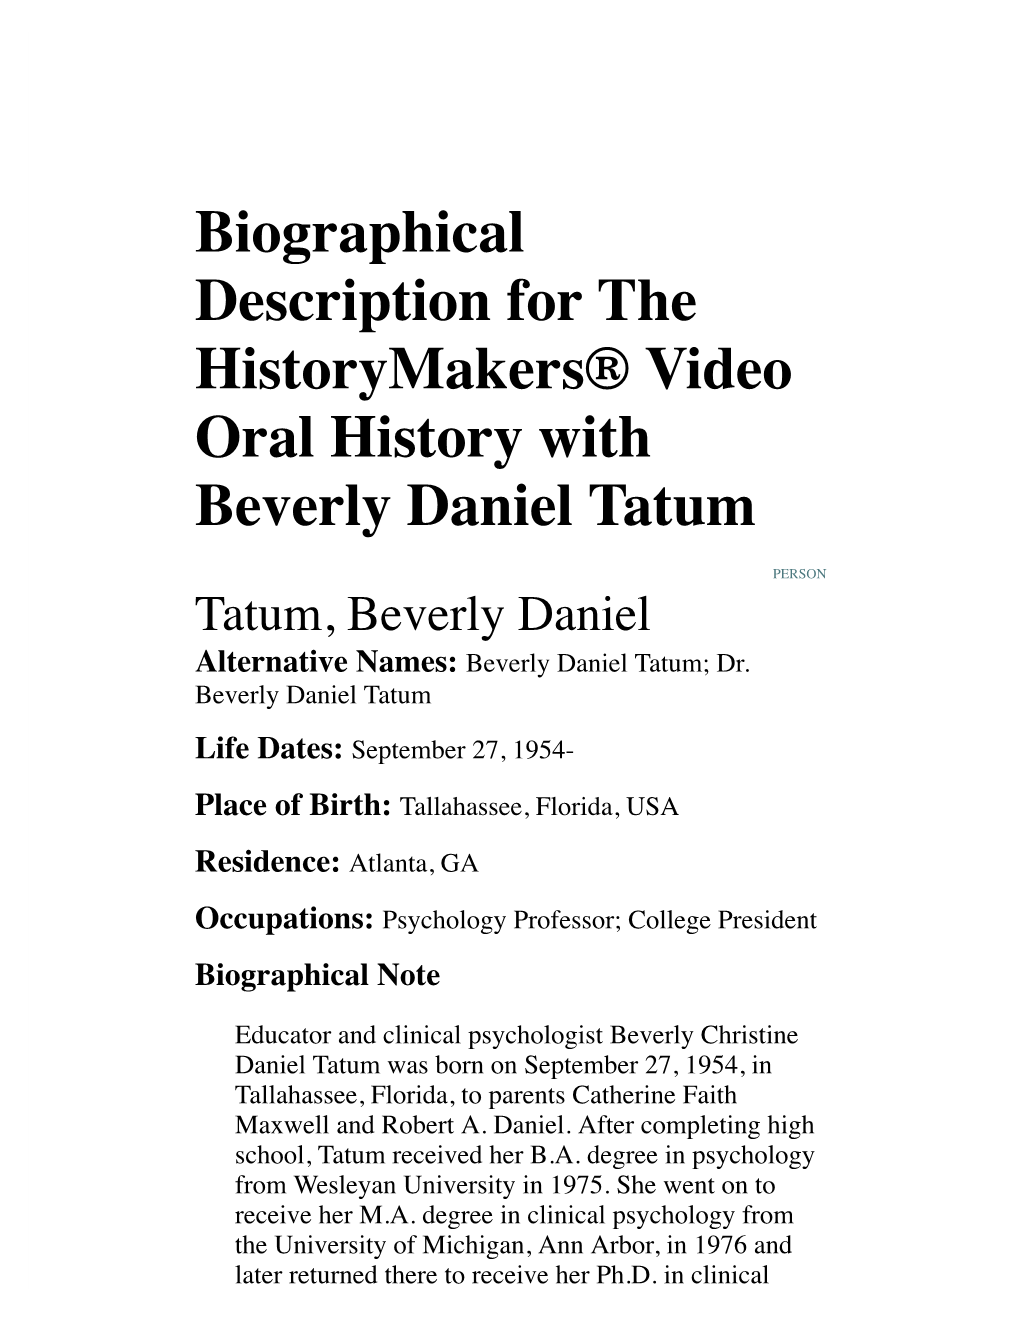 Biographical Description for the Historymakers® Video Oral History with Beverly Daniel Tatum